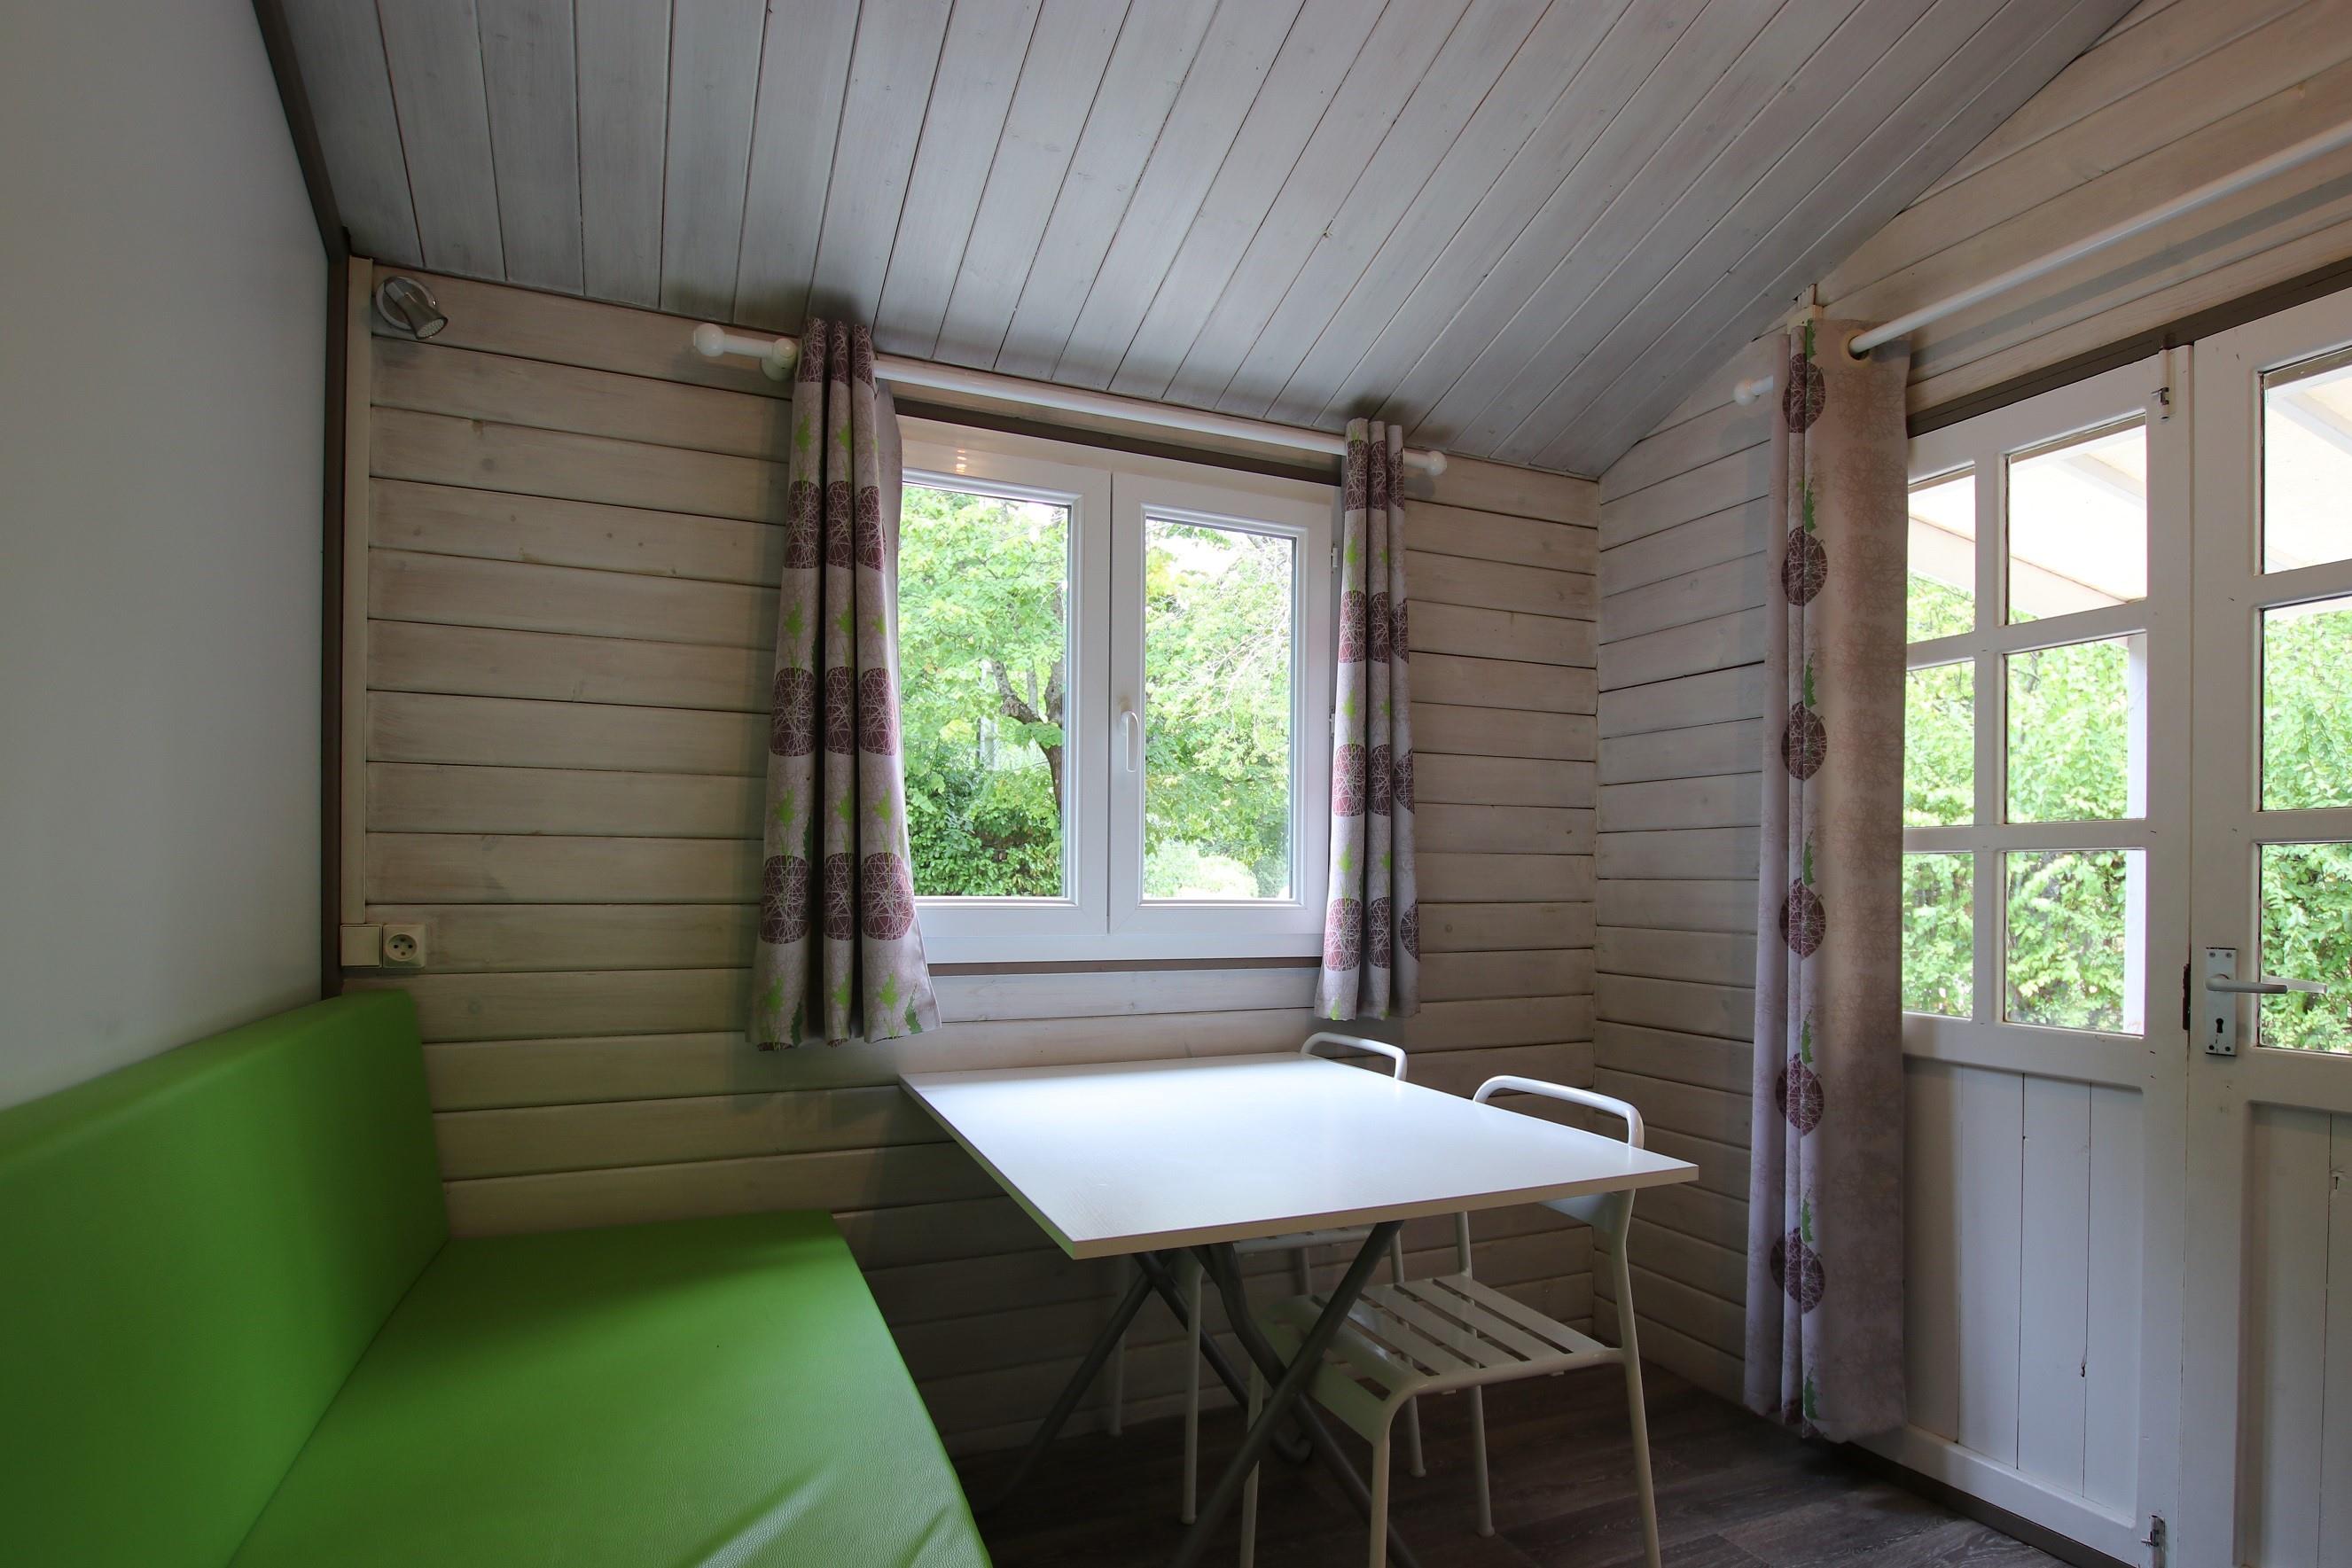 Accommodation - Chalet Cigalon 20M²   The Small Cozy   For  Couple Or Family With Young Children 2 Bedrooms - Domaine de l'Ecluse